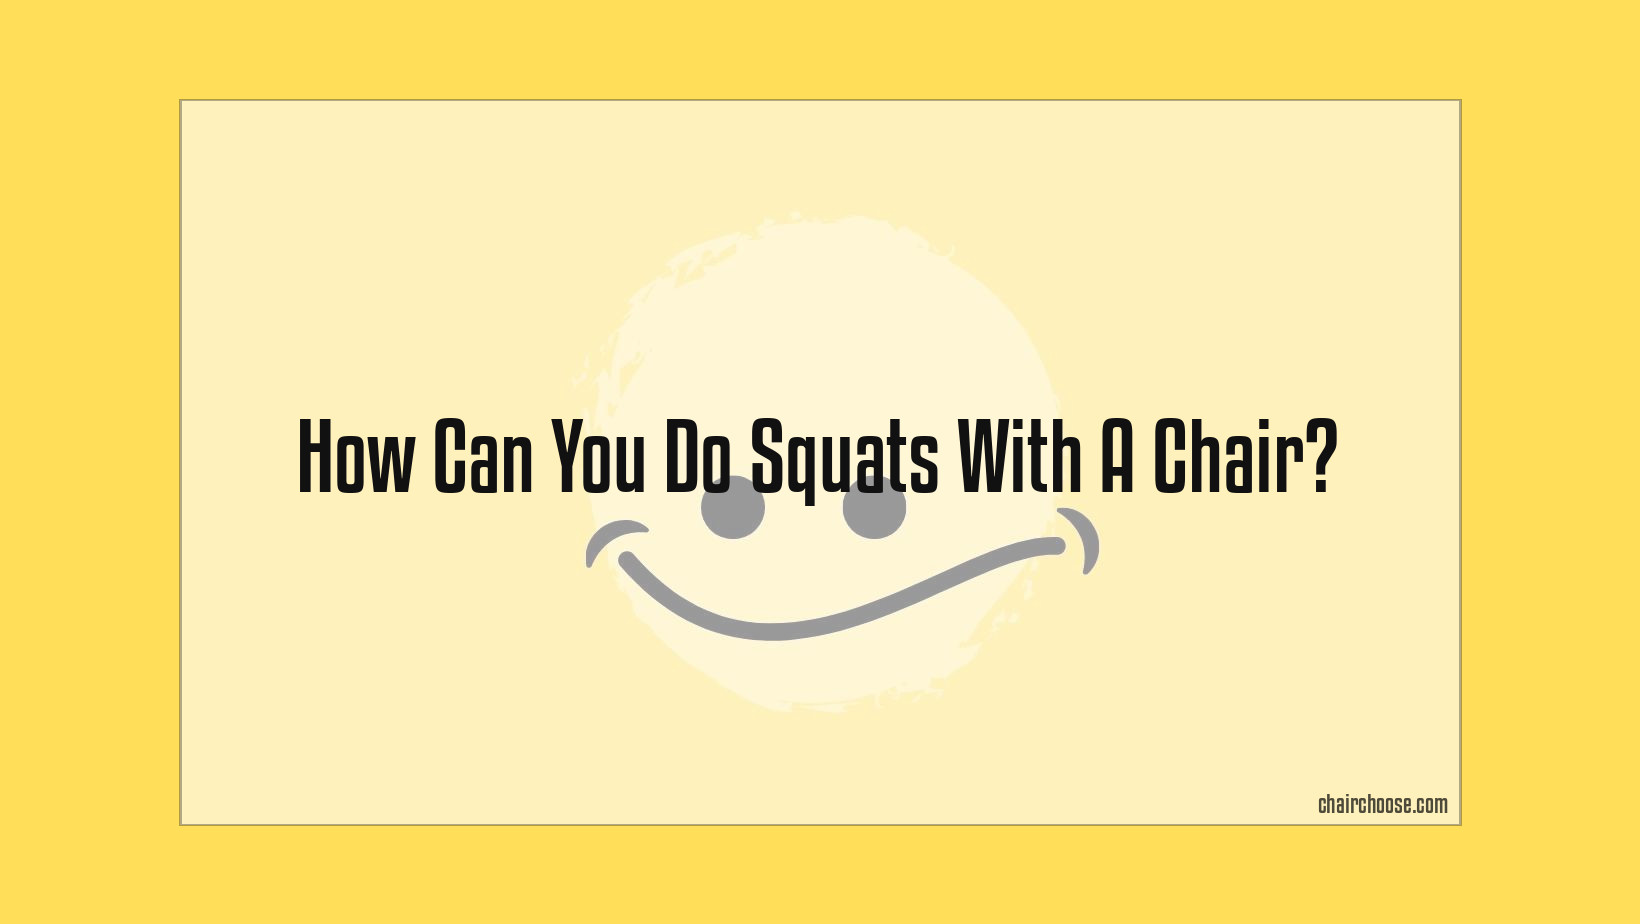 How Can You Do Squats With A Chair?